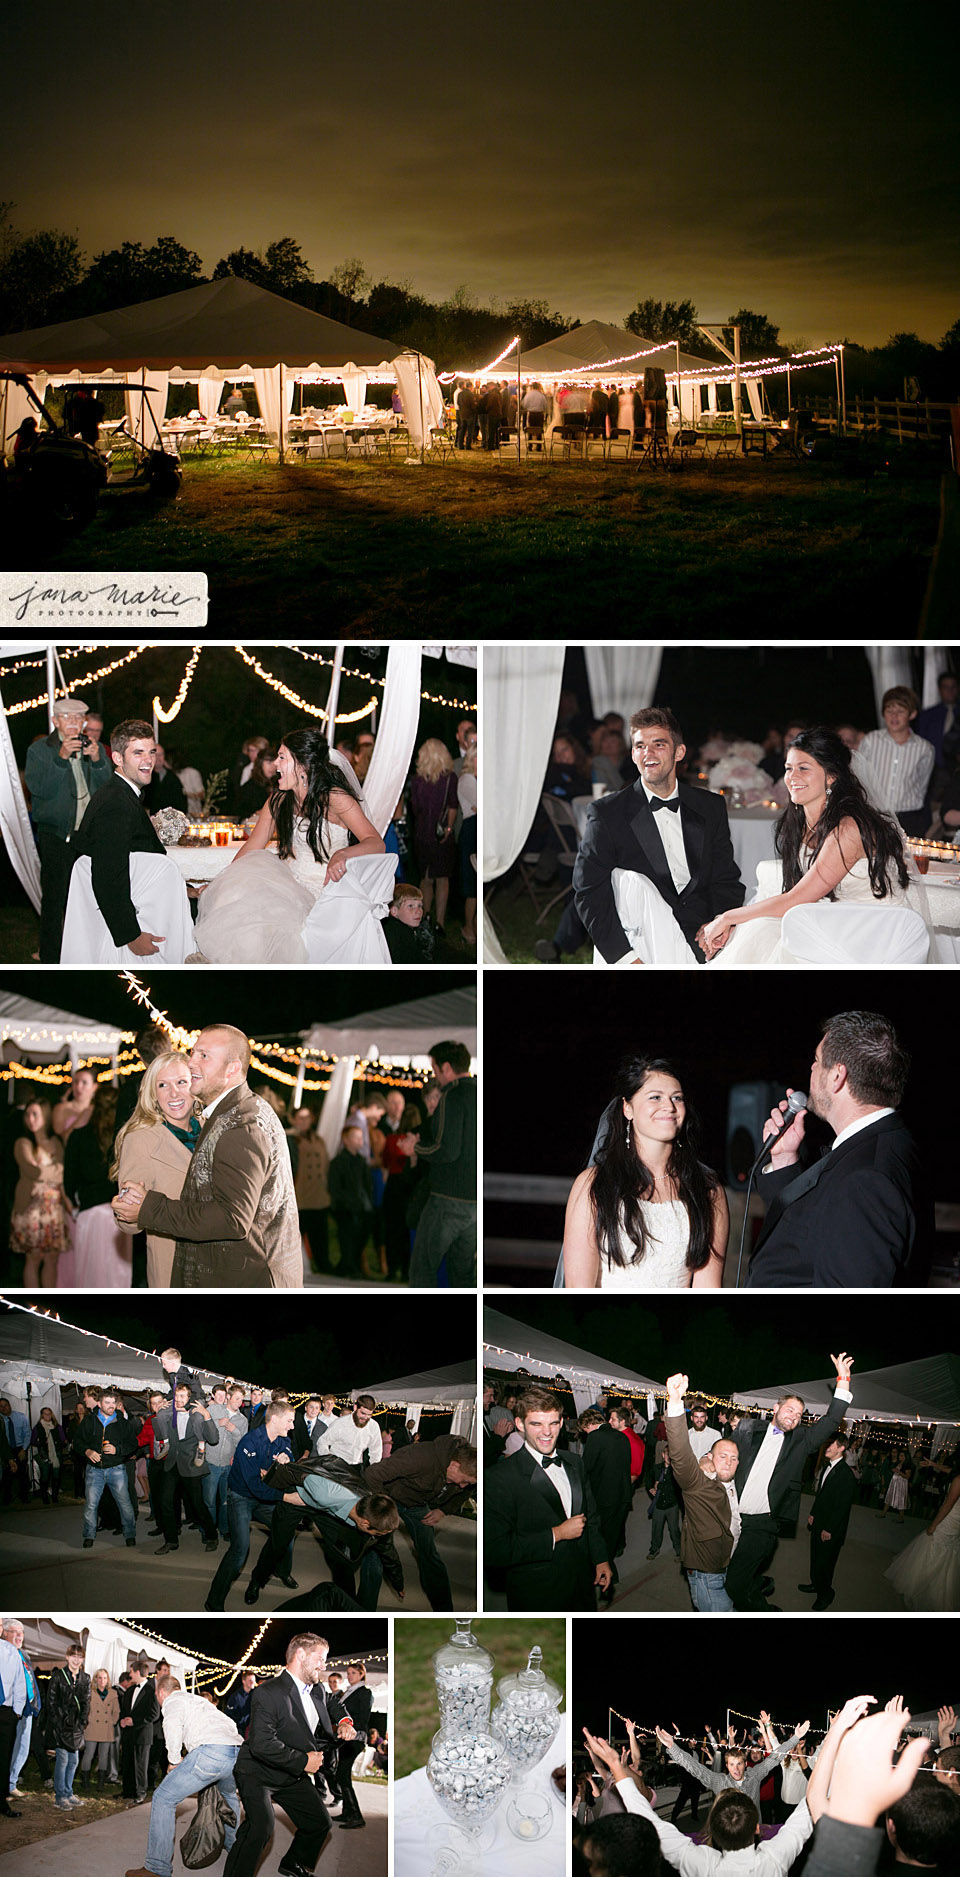 Dancing, reception ideas, YMCA, couples, father sings to bride, white tent company